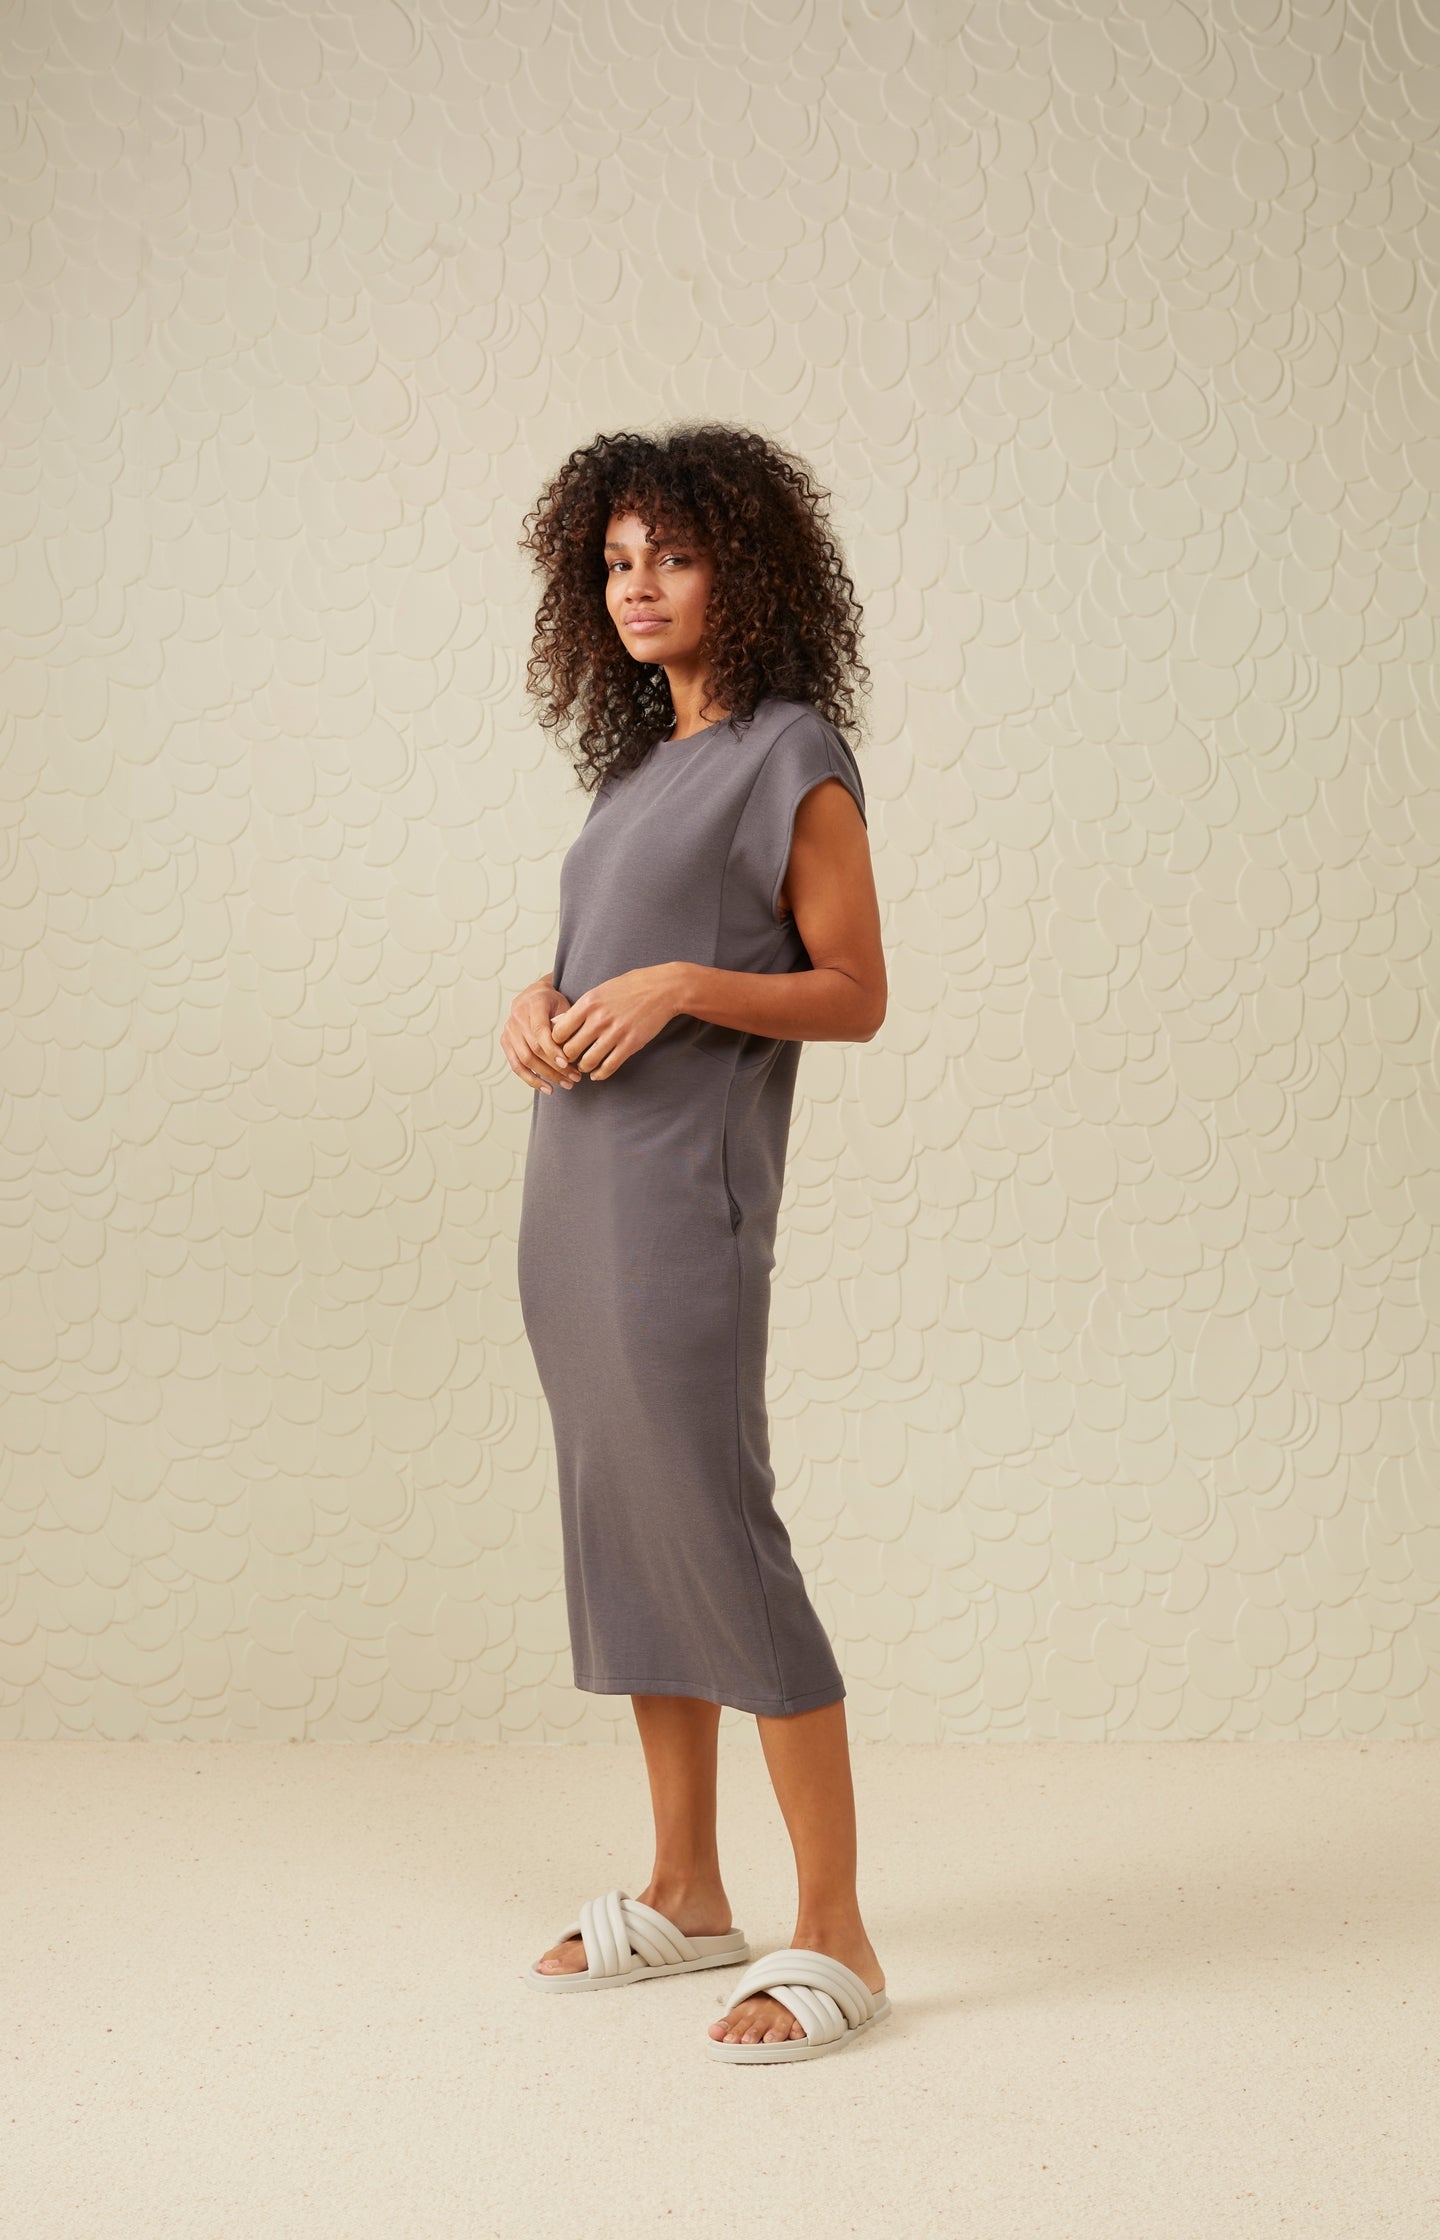 Sleeveless jersey dress with round neck, pockets and a slit - Type: lookbook